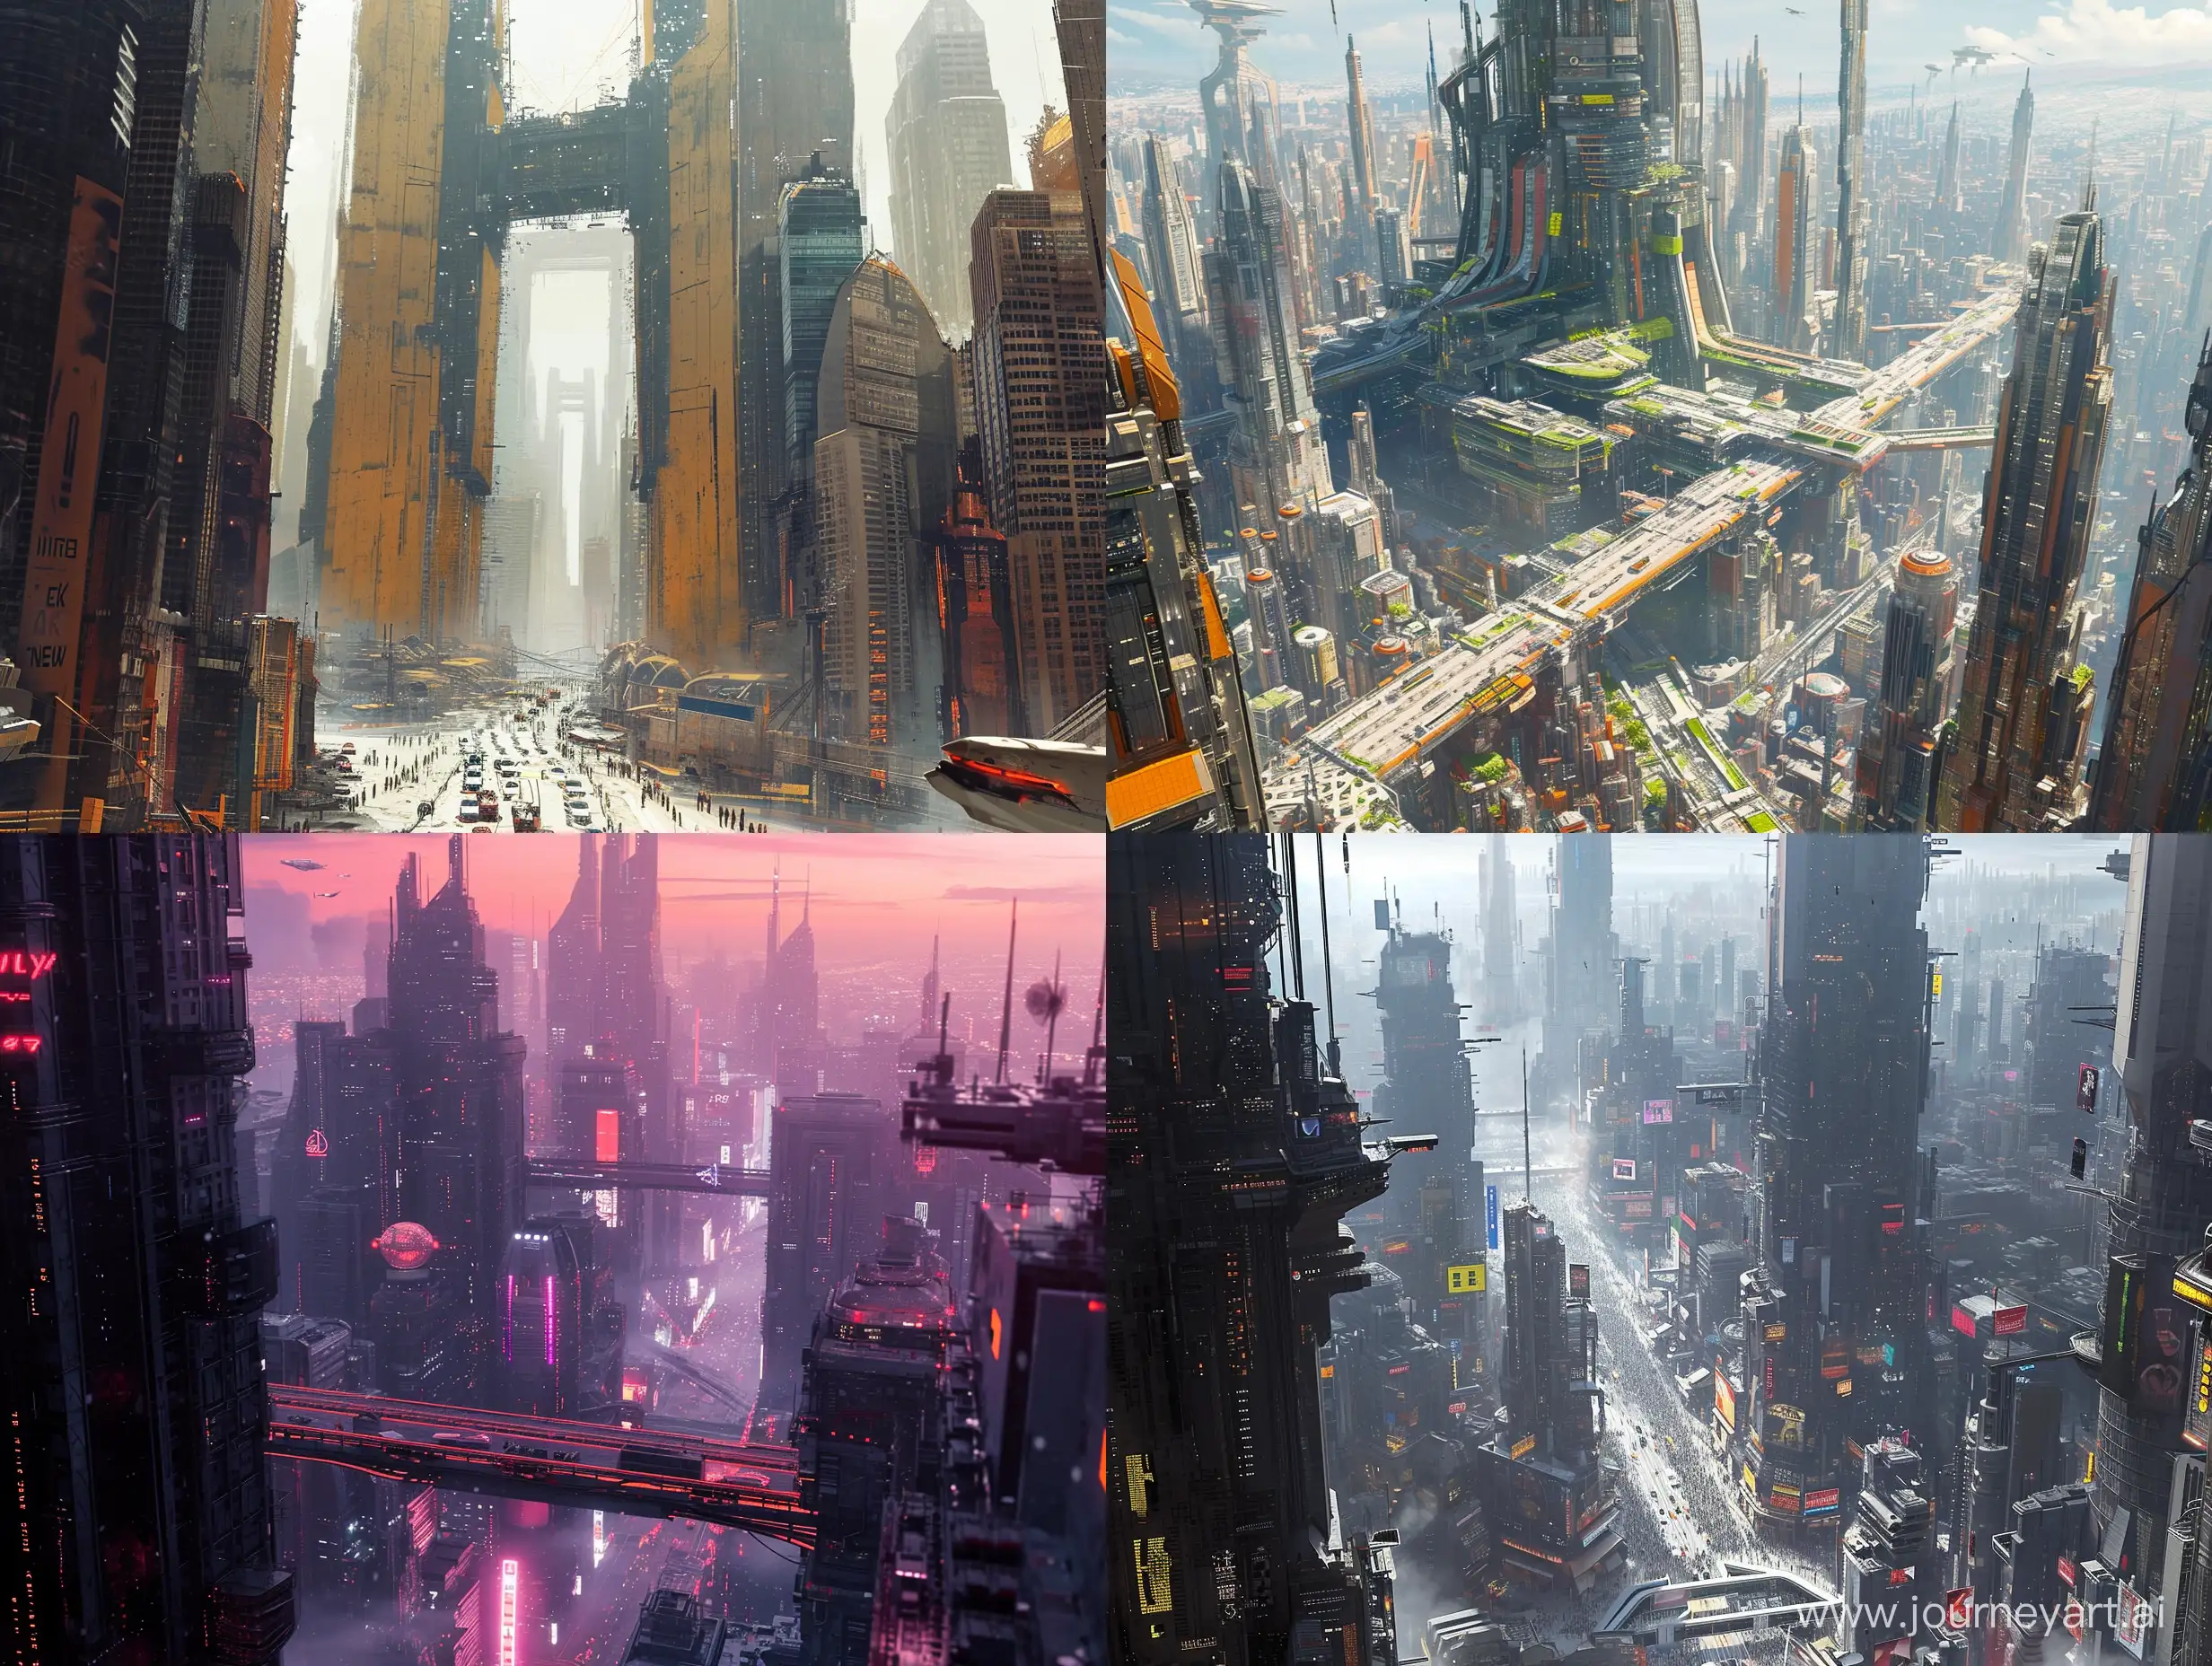  a Futuristic city, gitpunk, detailed to precise, sci fi, modern, busy environment, naturalism, vibrant, transportation, cinematic, soft visuals to match the mood, modern architectures, stars wars city design inspired, dystopian, ancient skyscrapers and buildings, residences, new york city
